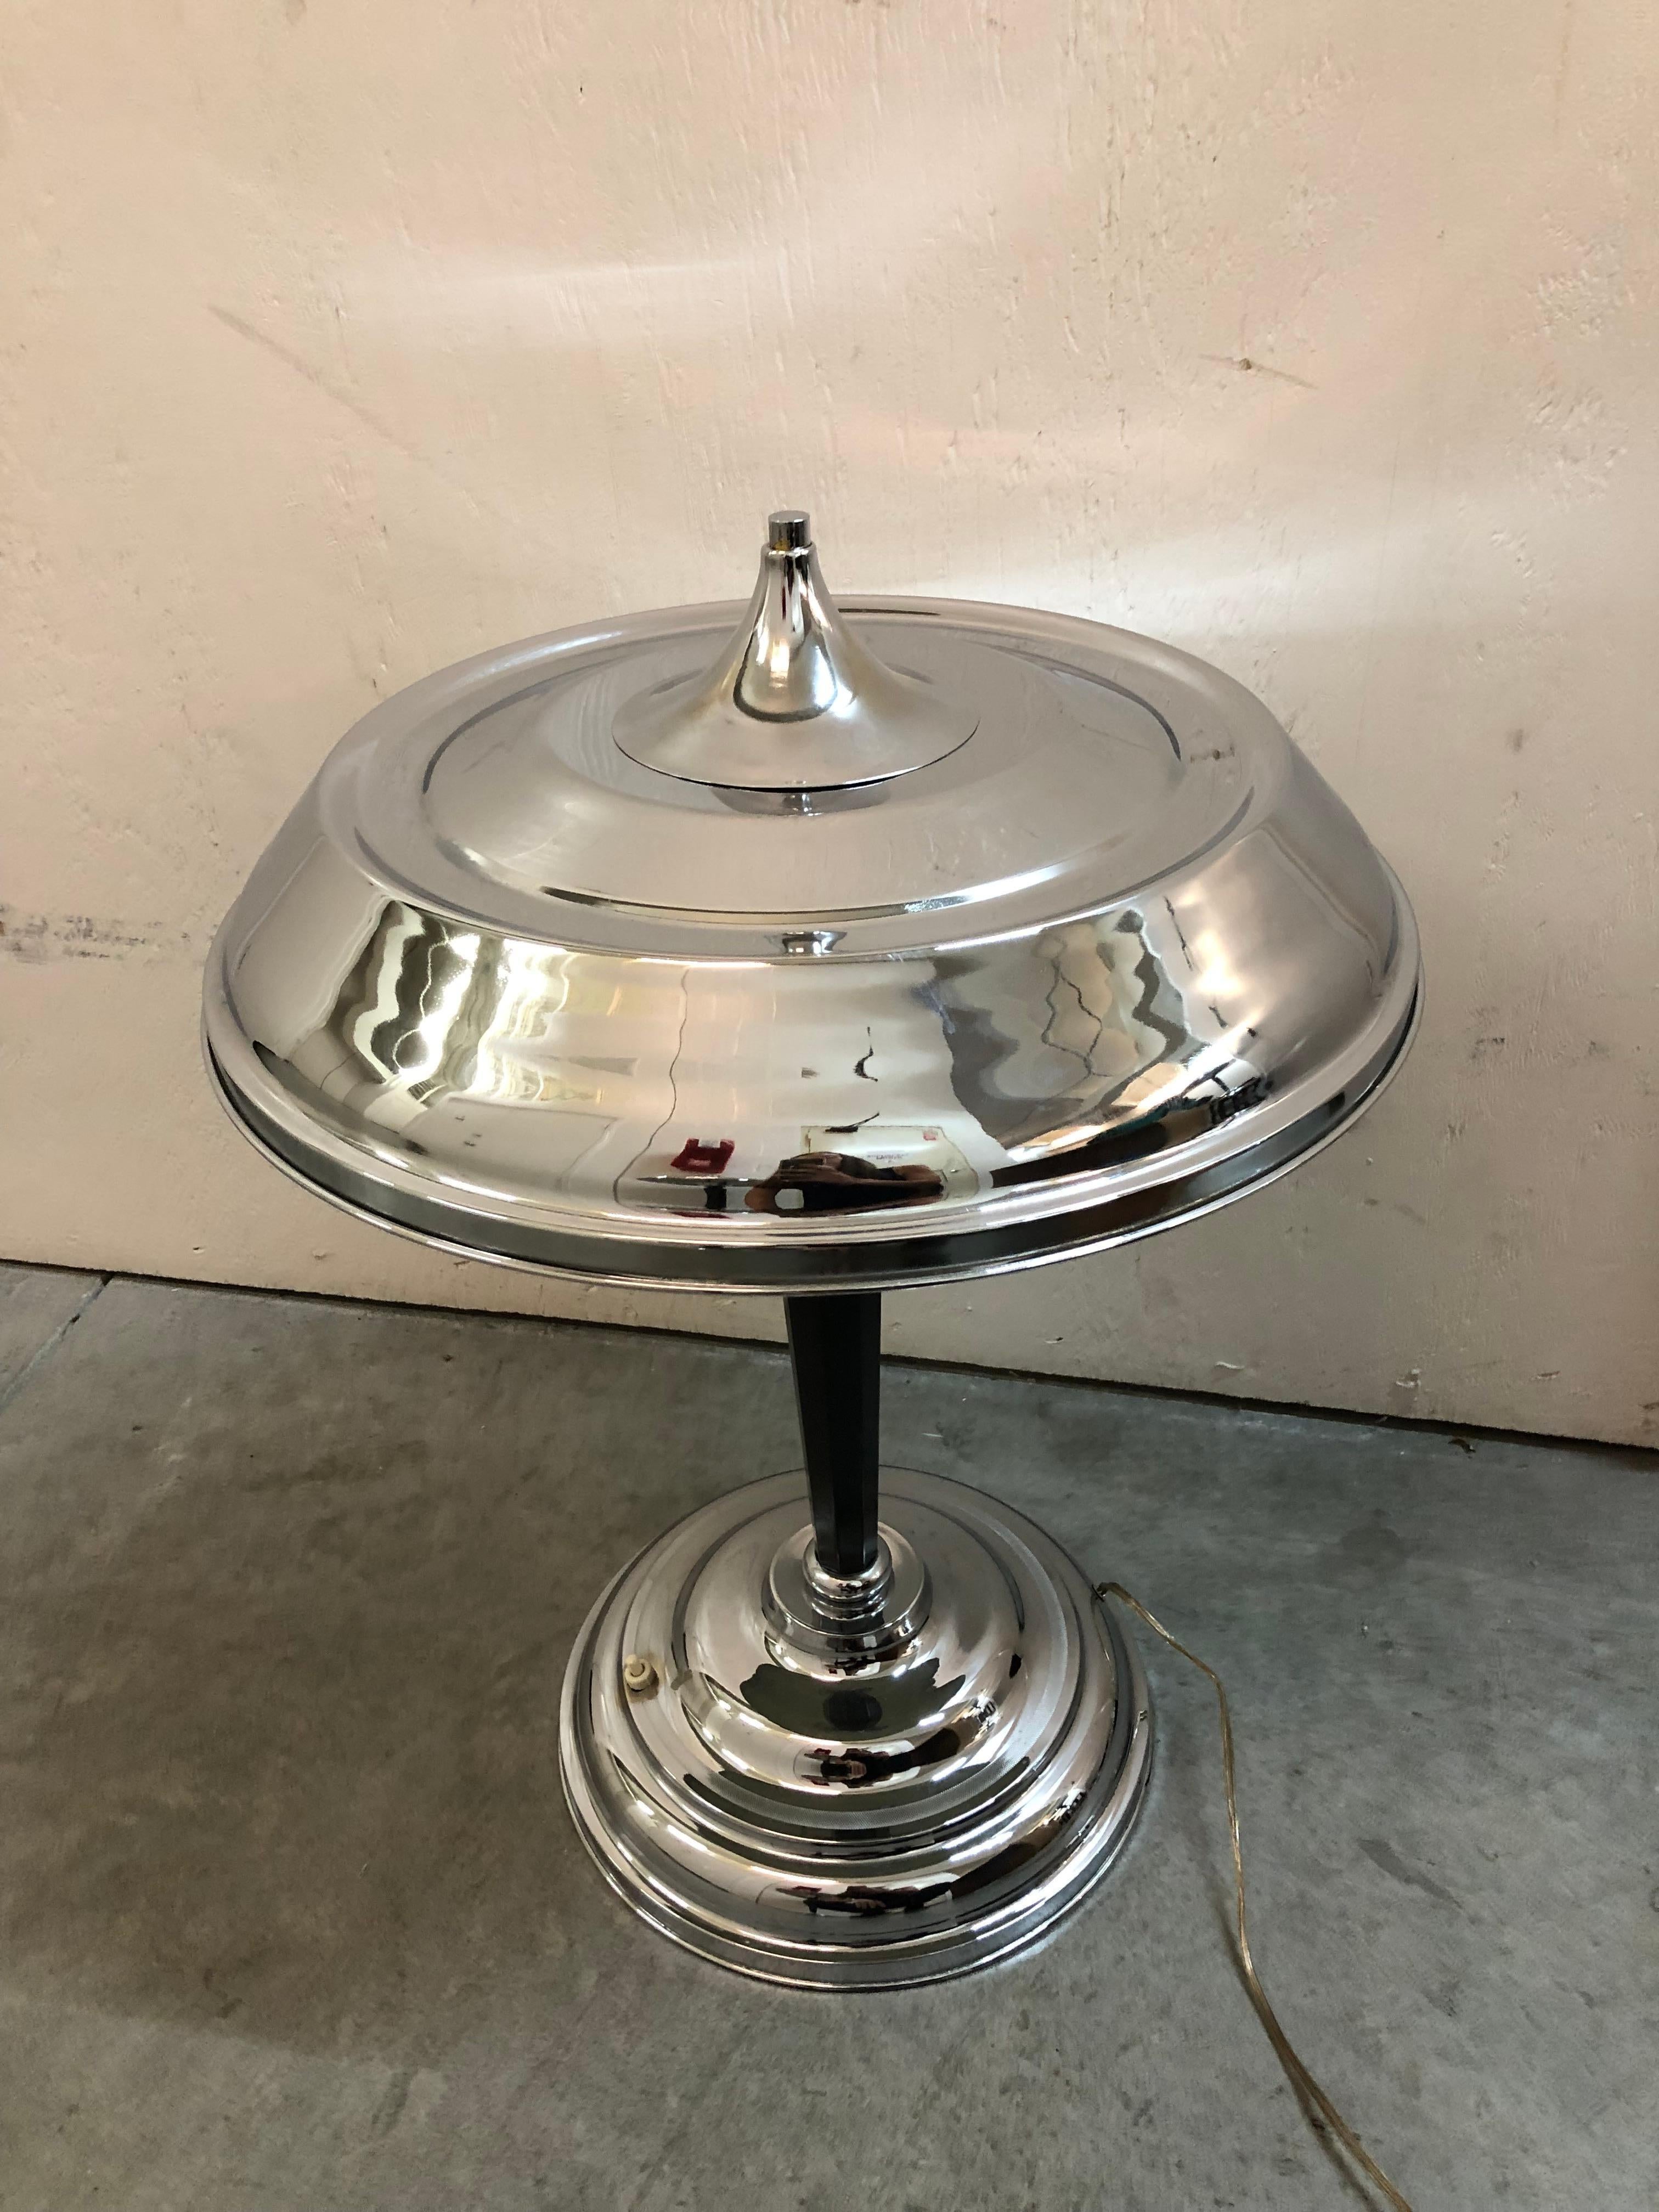 Desk lamp Art deco.

Materia: chromed and wood
Style: Art Deco
Country: German
To take care of your property and the lives of our customers, the new wiring has been done.
If you want to live in the golden years, this is the Desk lamp that your